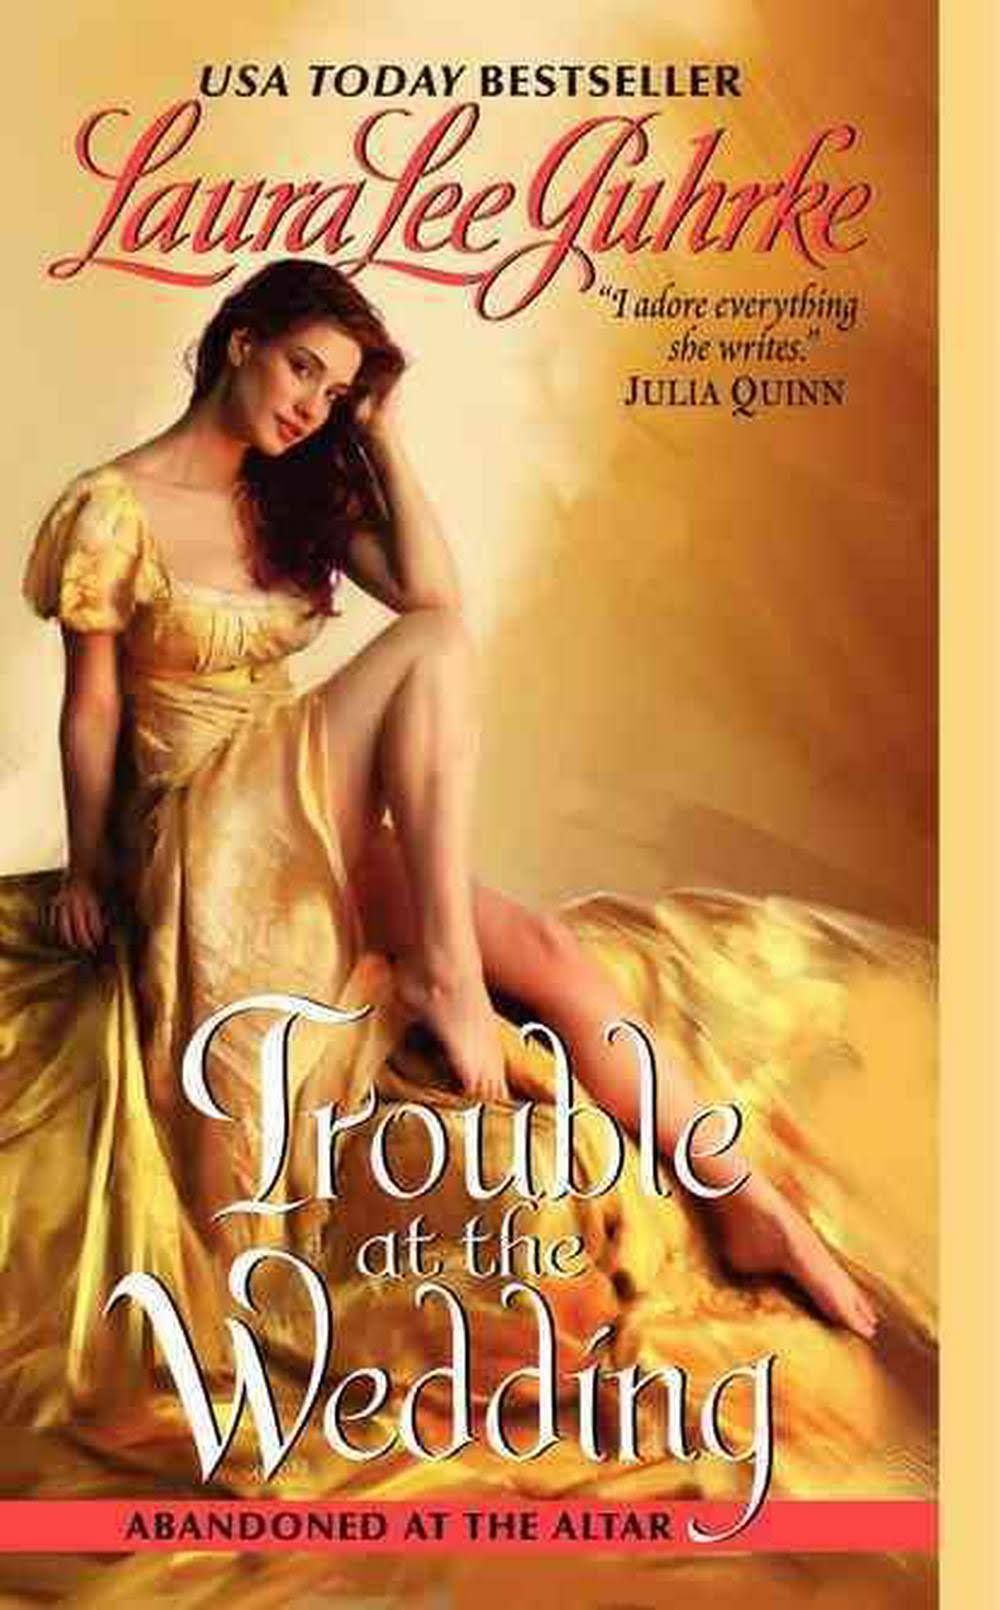 Trouble at the Wedding - Laura Lee Guhrke